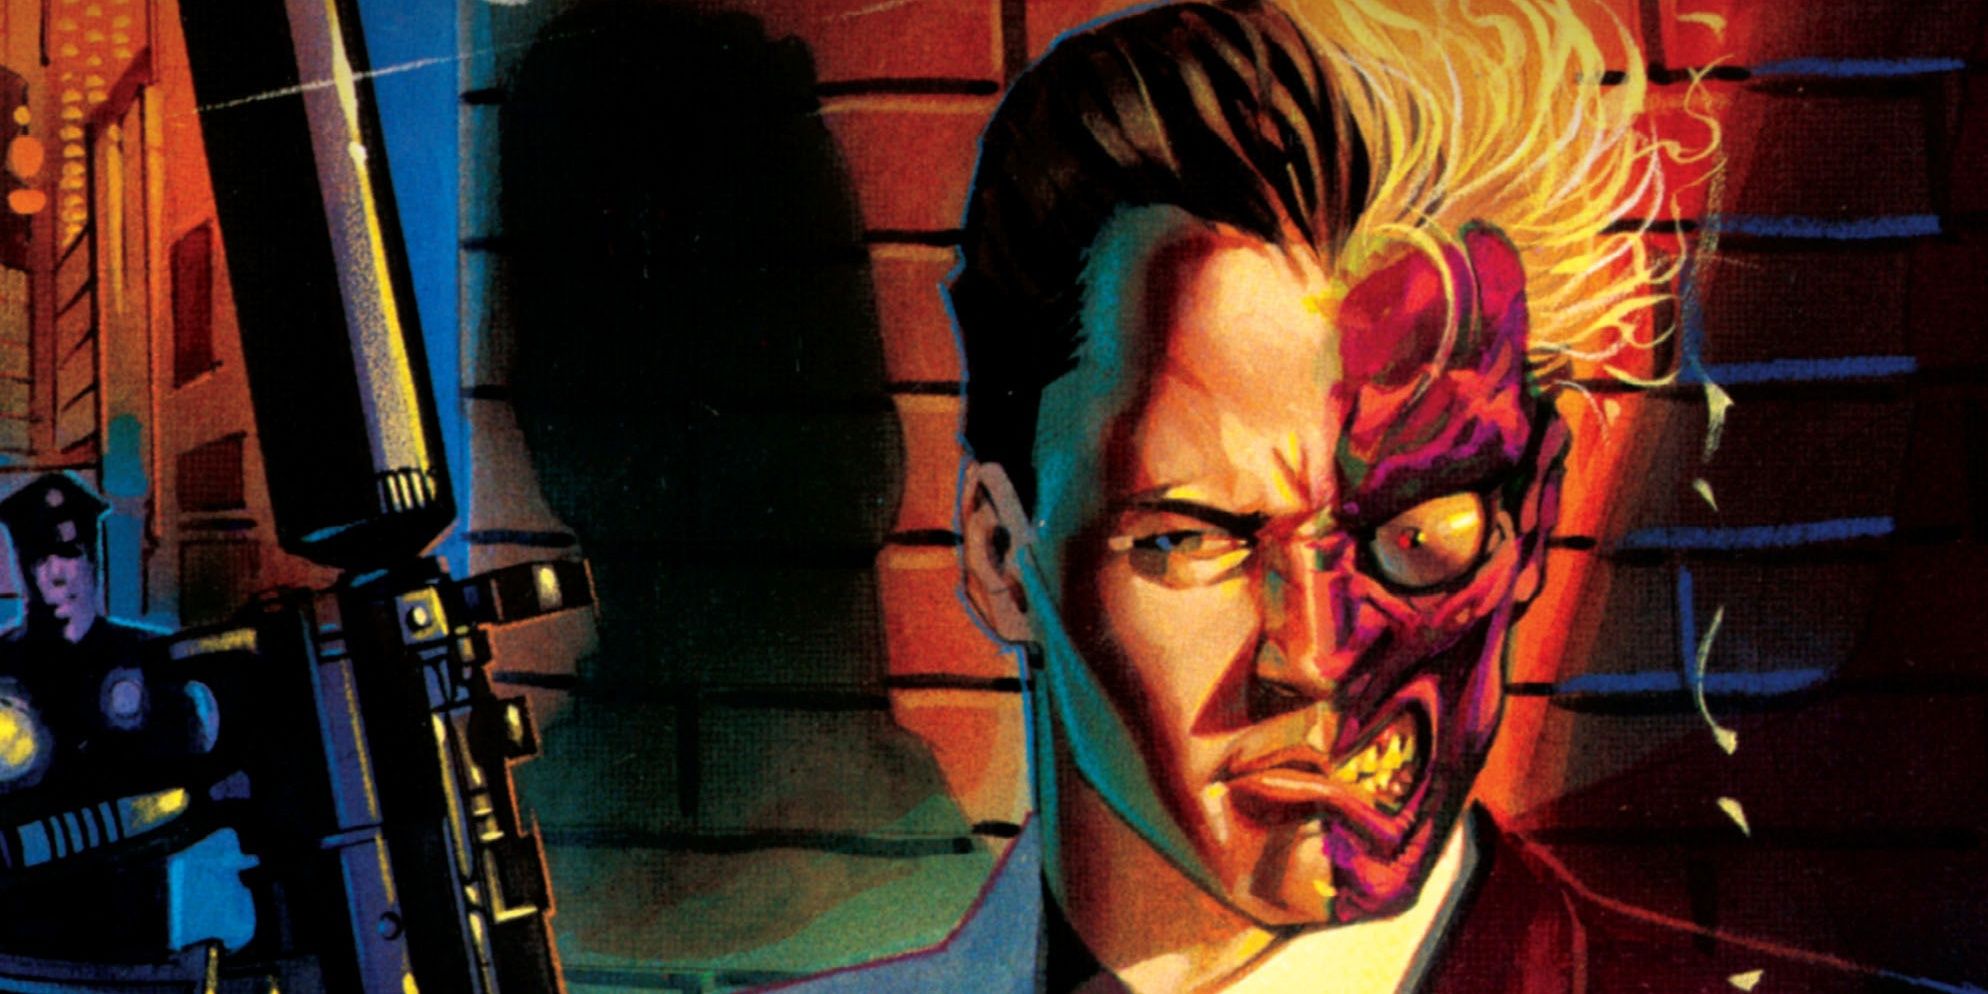 Two Face on the cover of the comic Batman Arkham Two Face with a menacing expression holding a gun